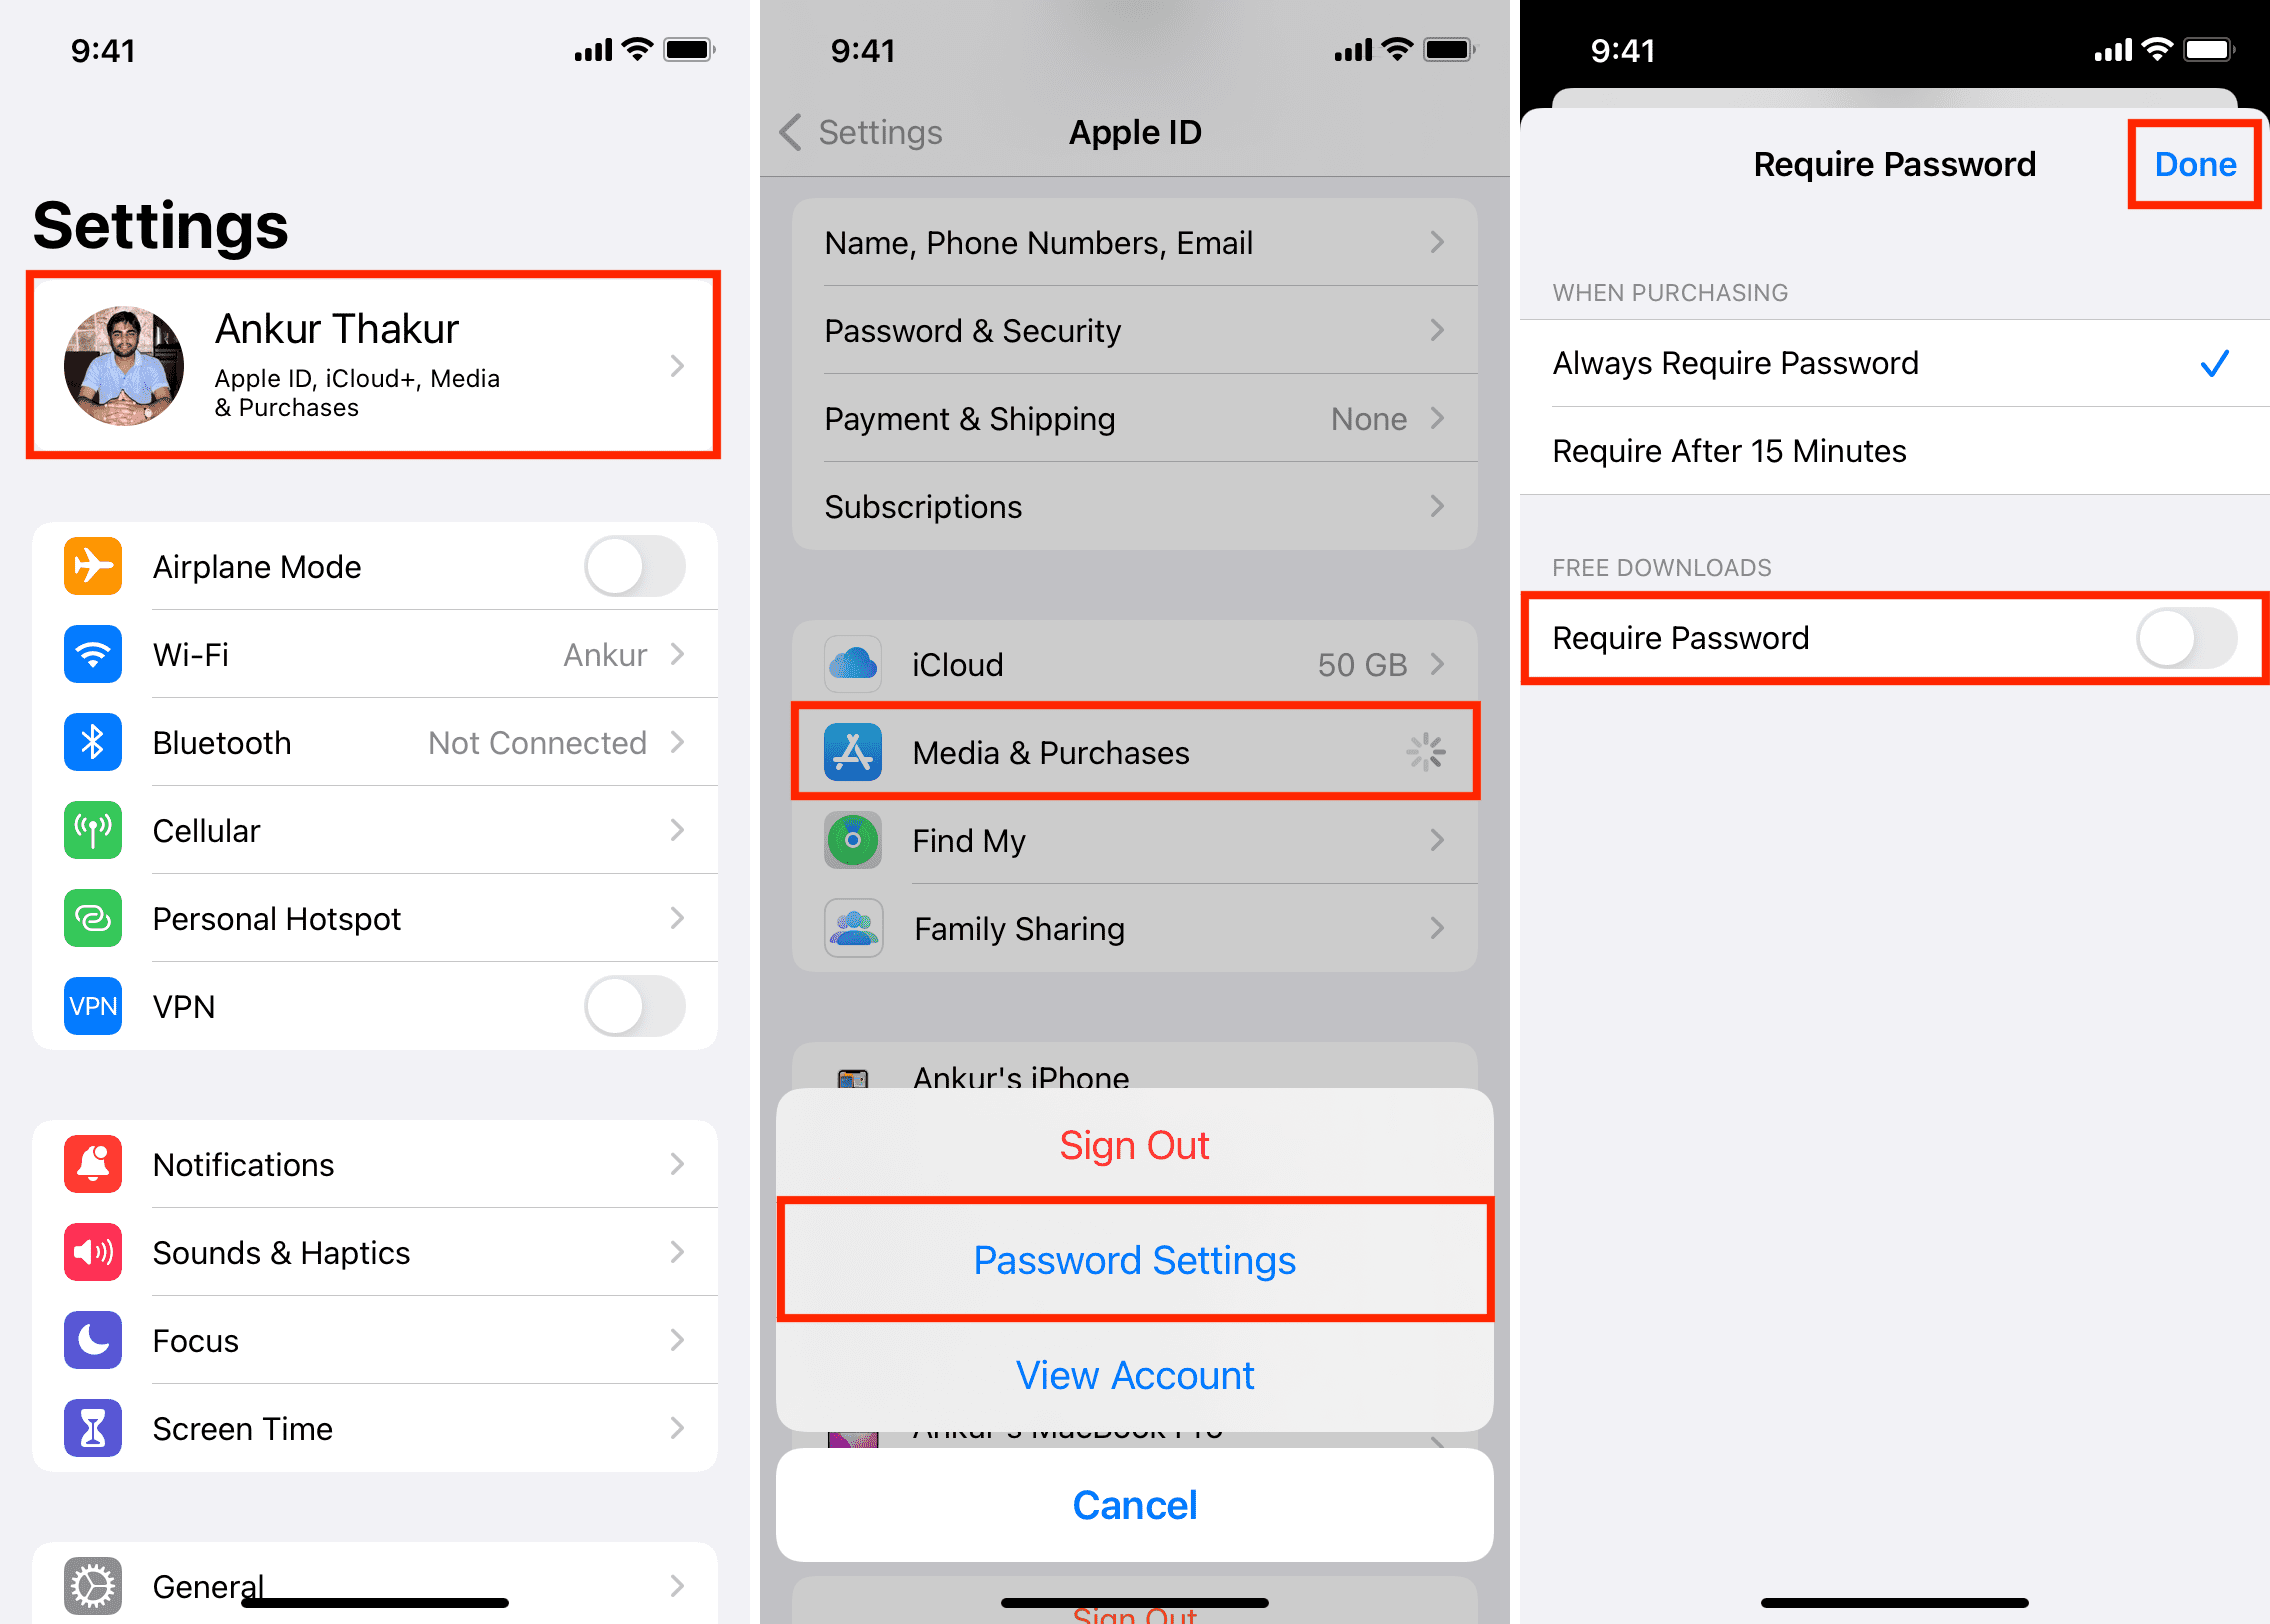 How To Download Apps On IPhone Without Password